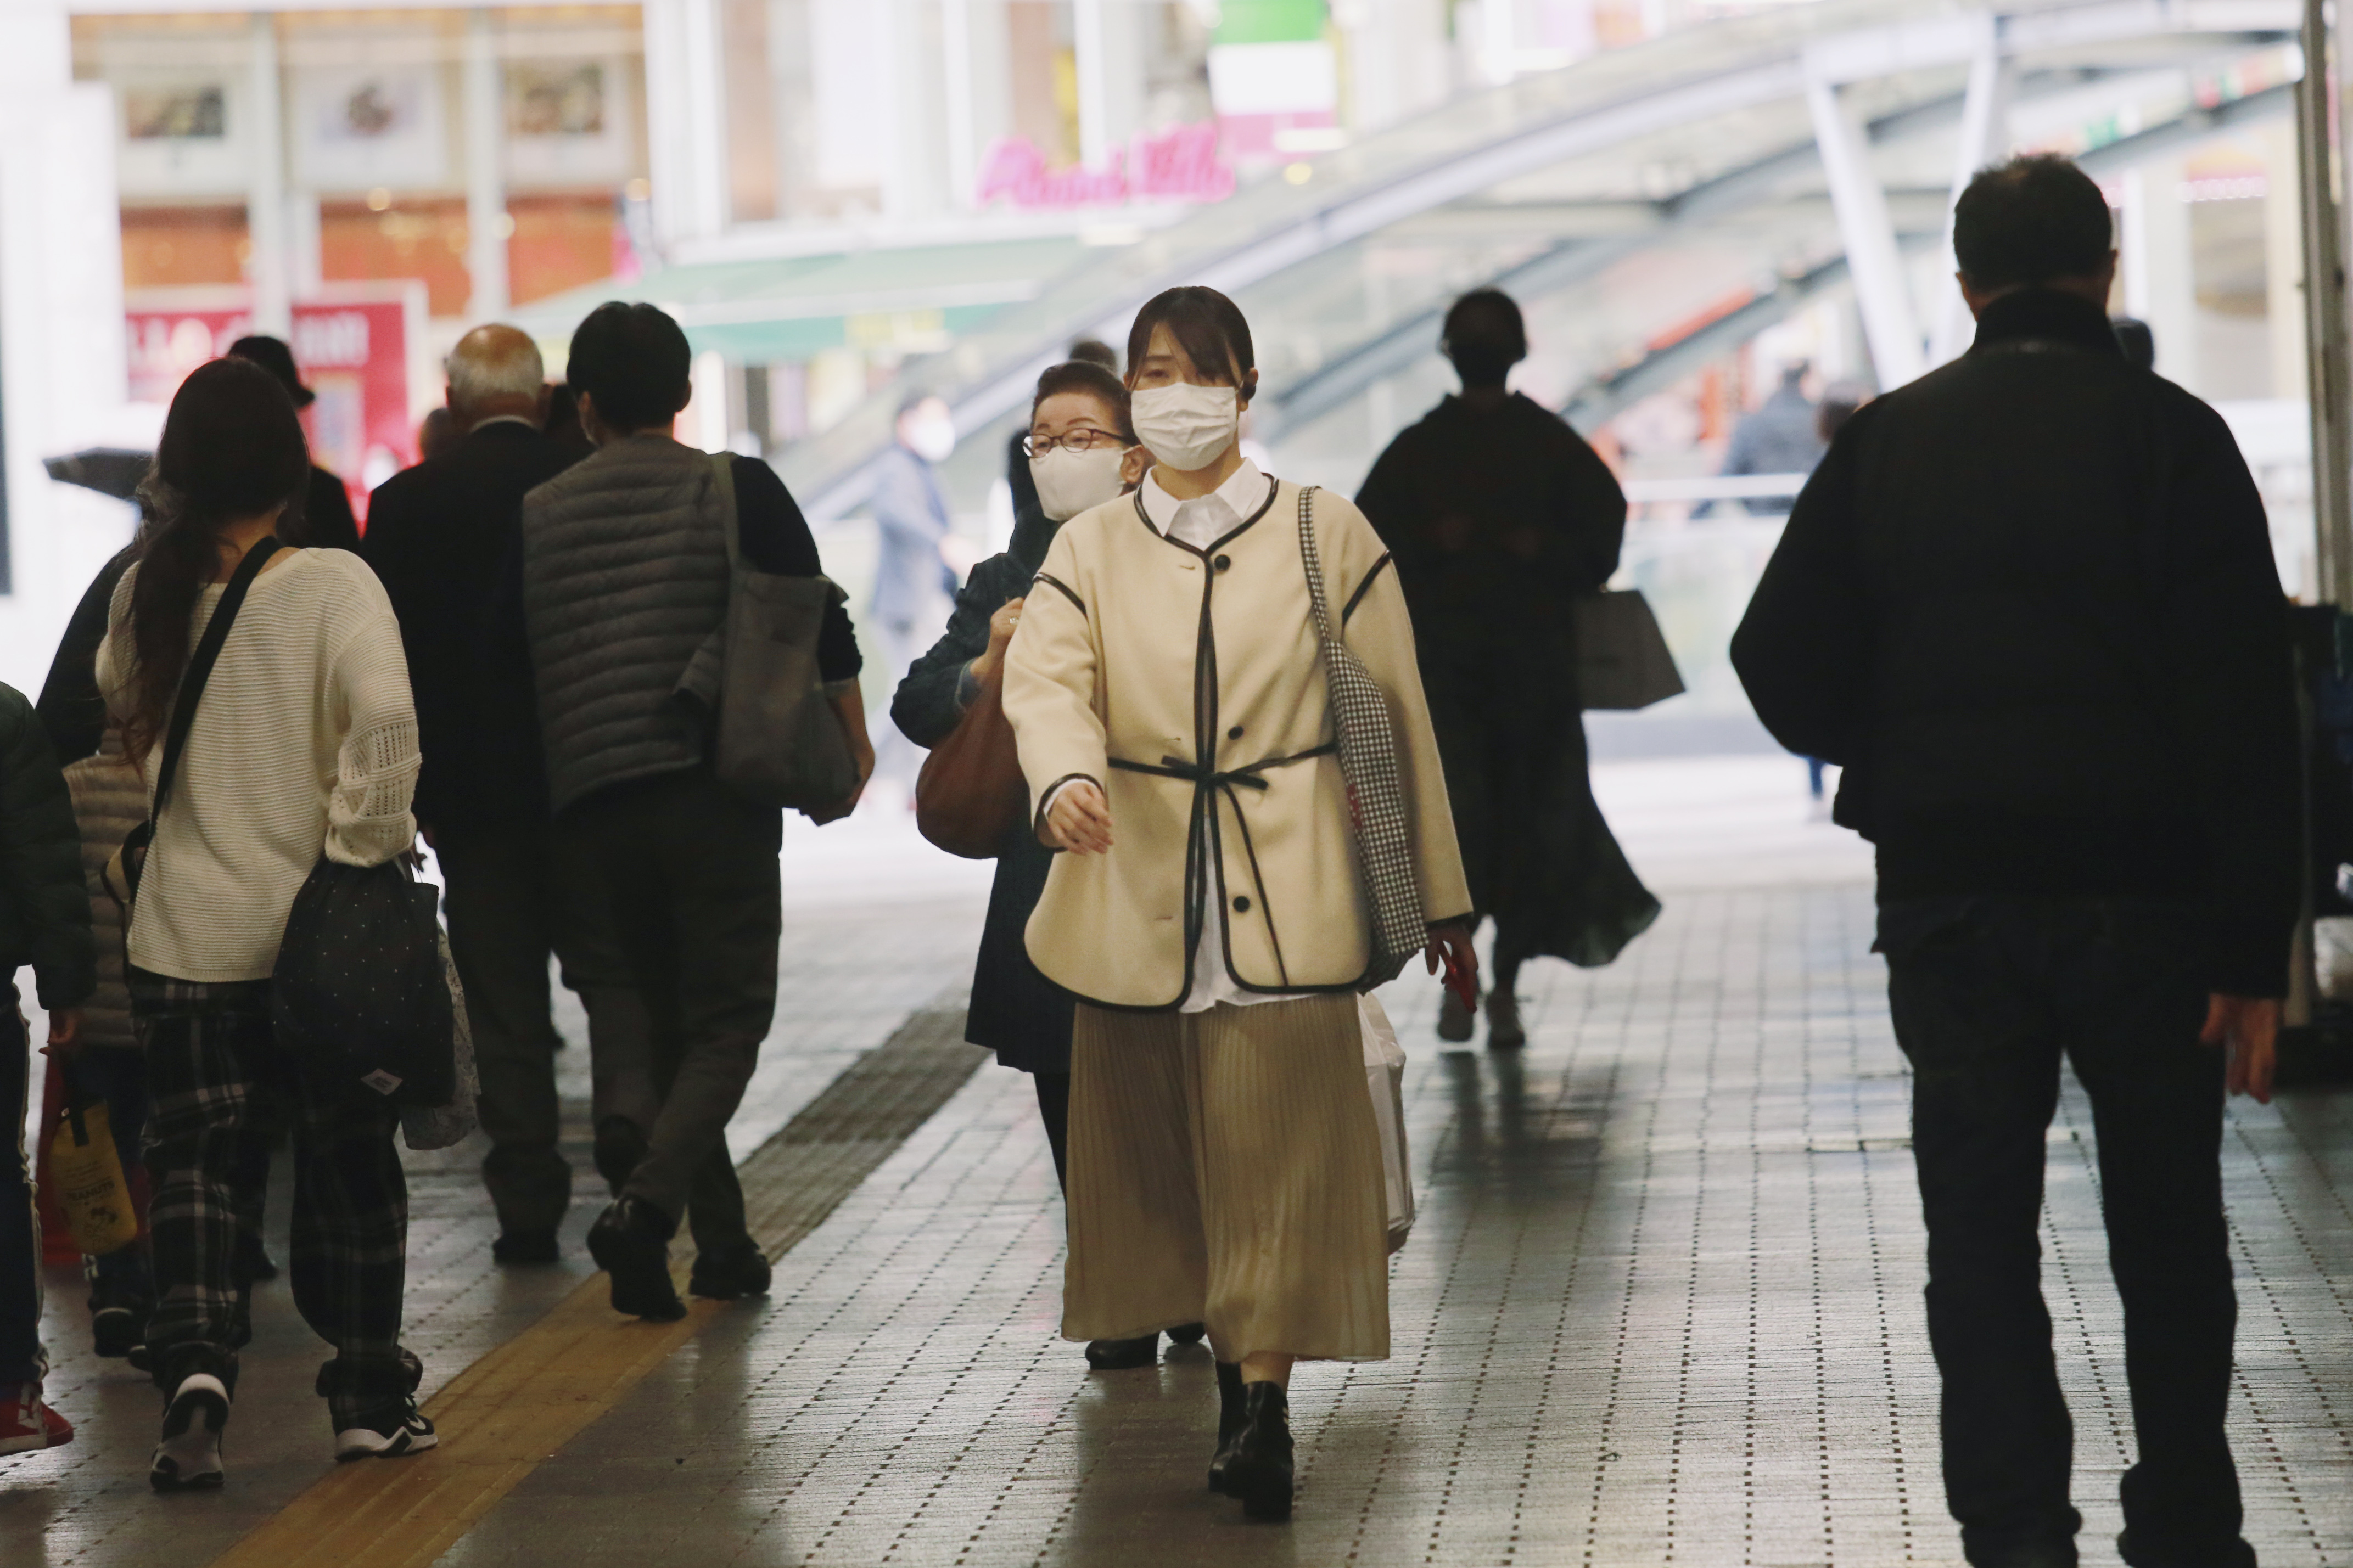 People wearing face masks to help curb the spread of the coronavirus walk underpass in Tokyo, Wednesday, Nov. 18, 2020. Photo: AP